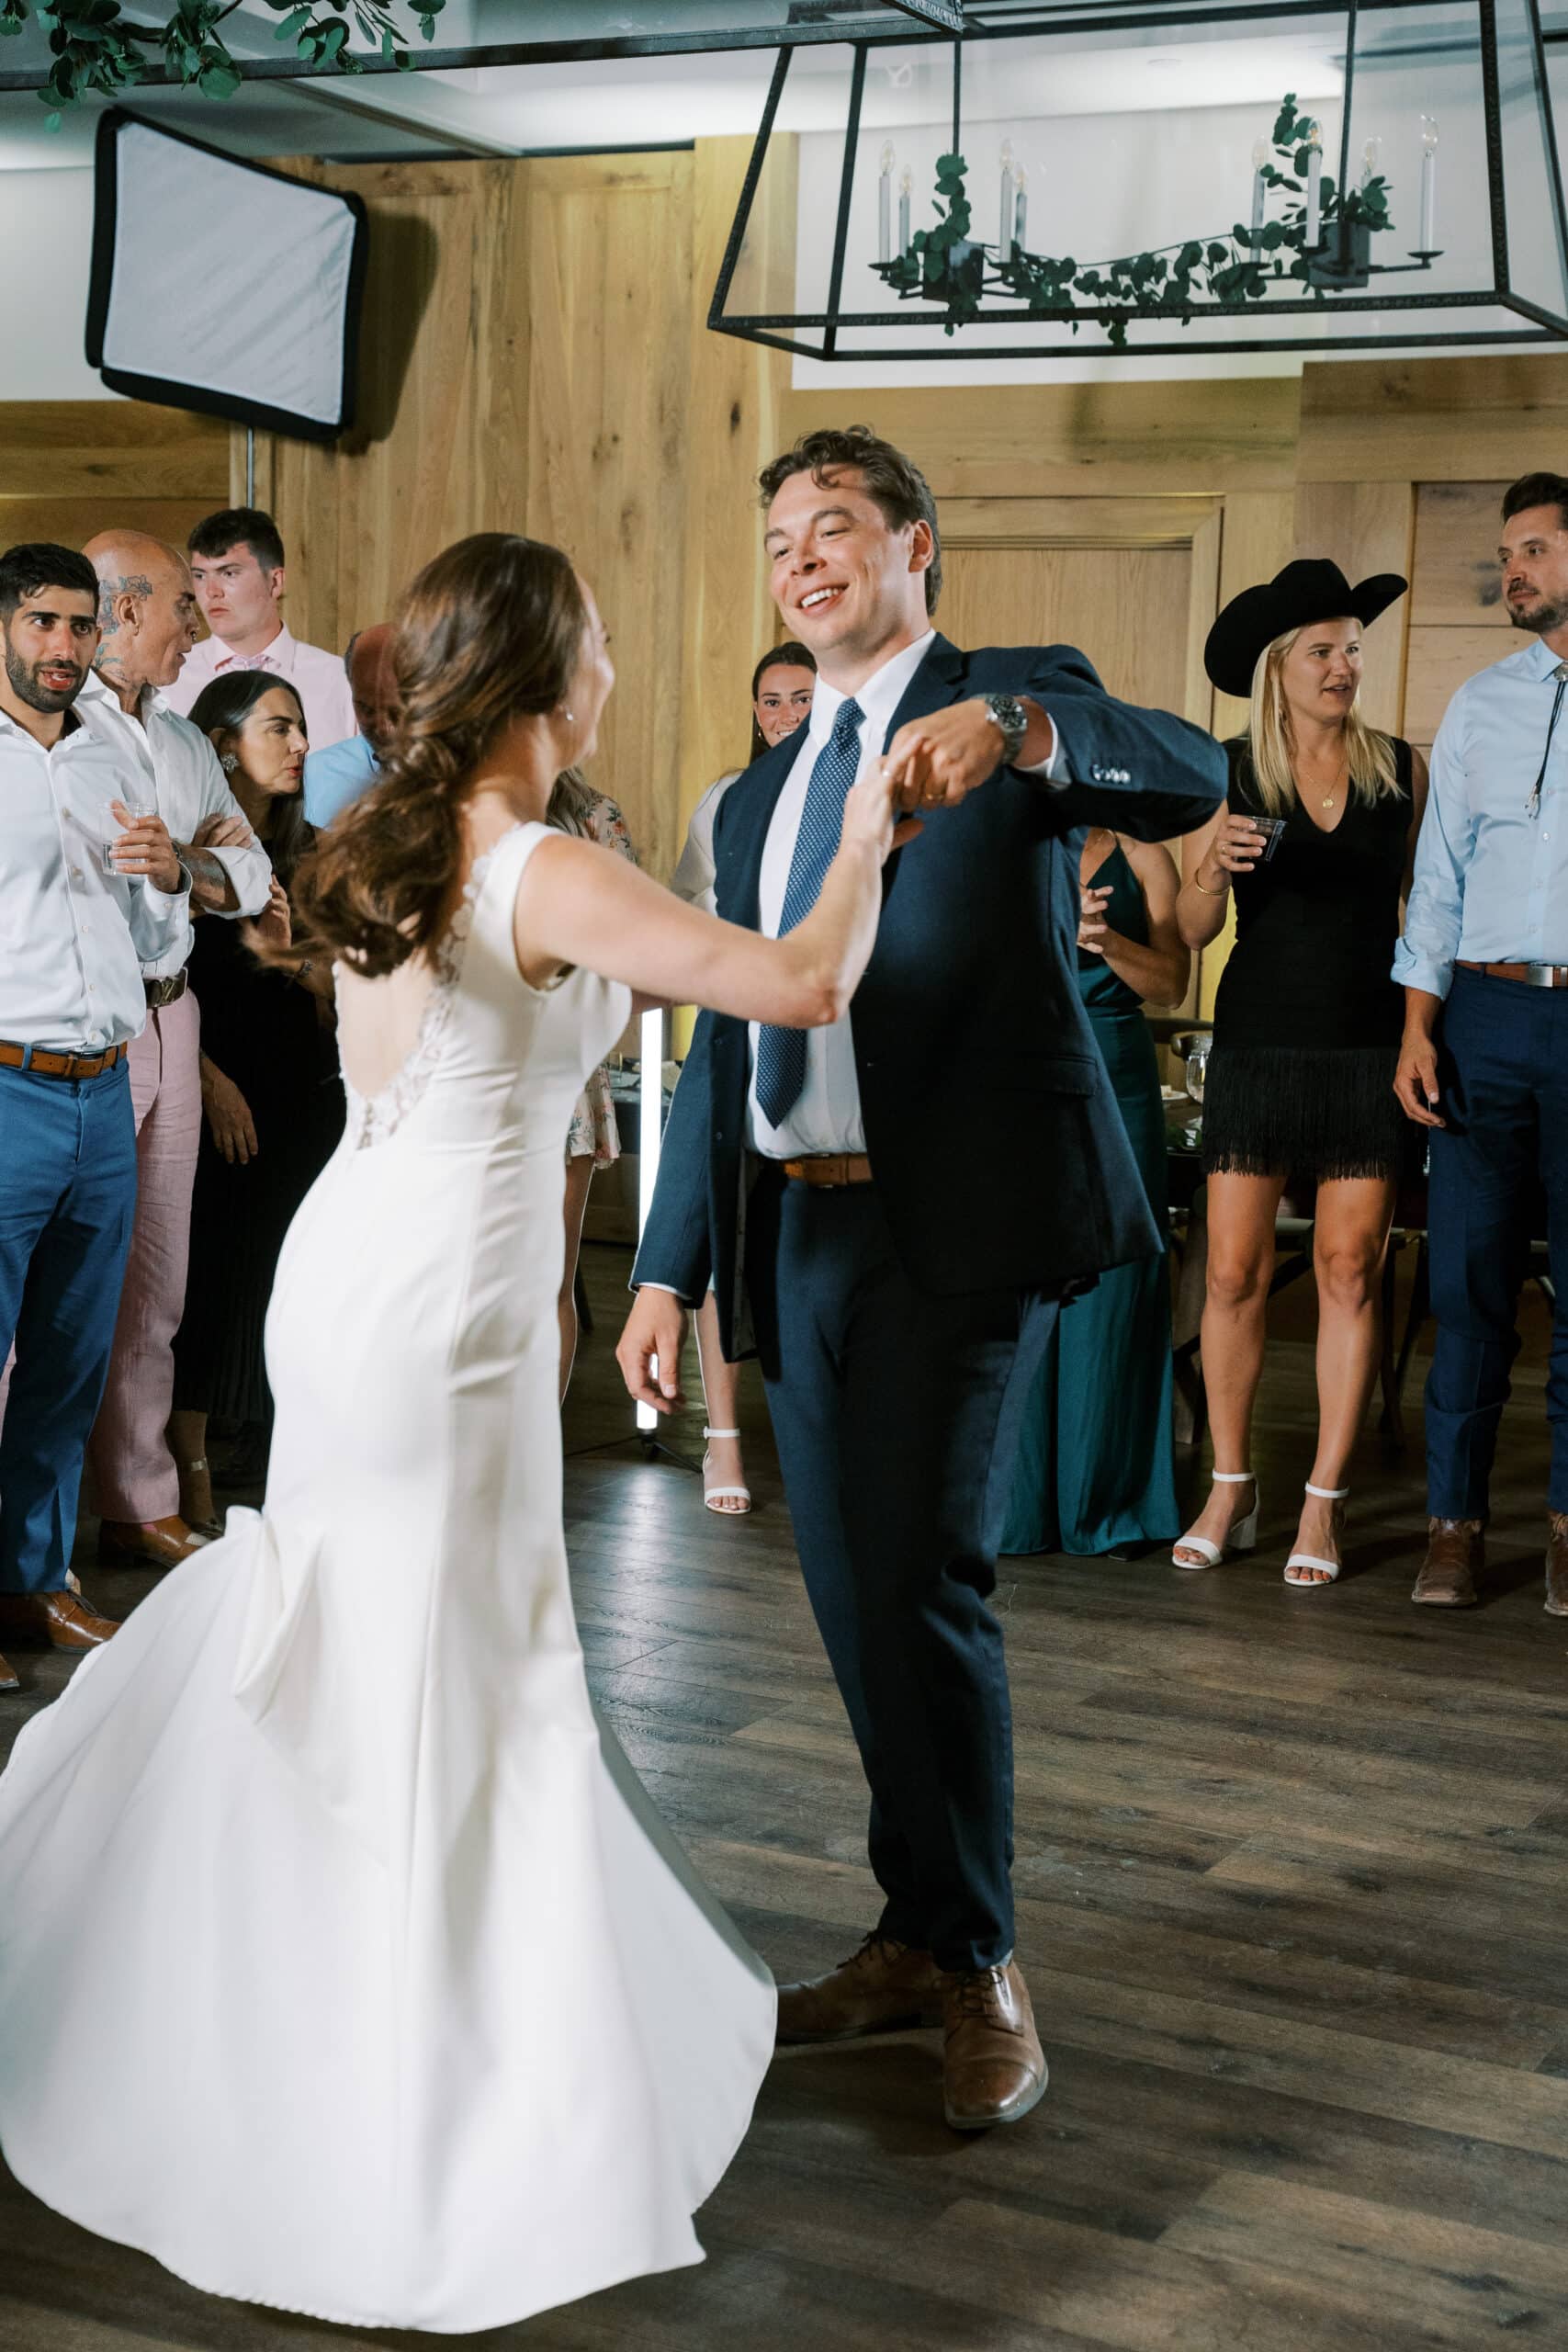 First Dance as a Couple